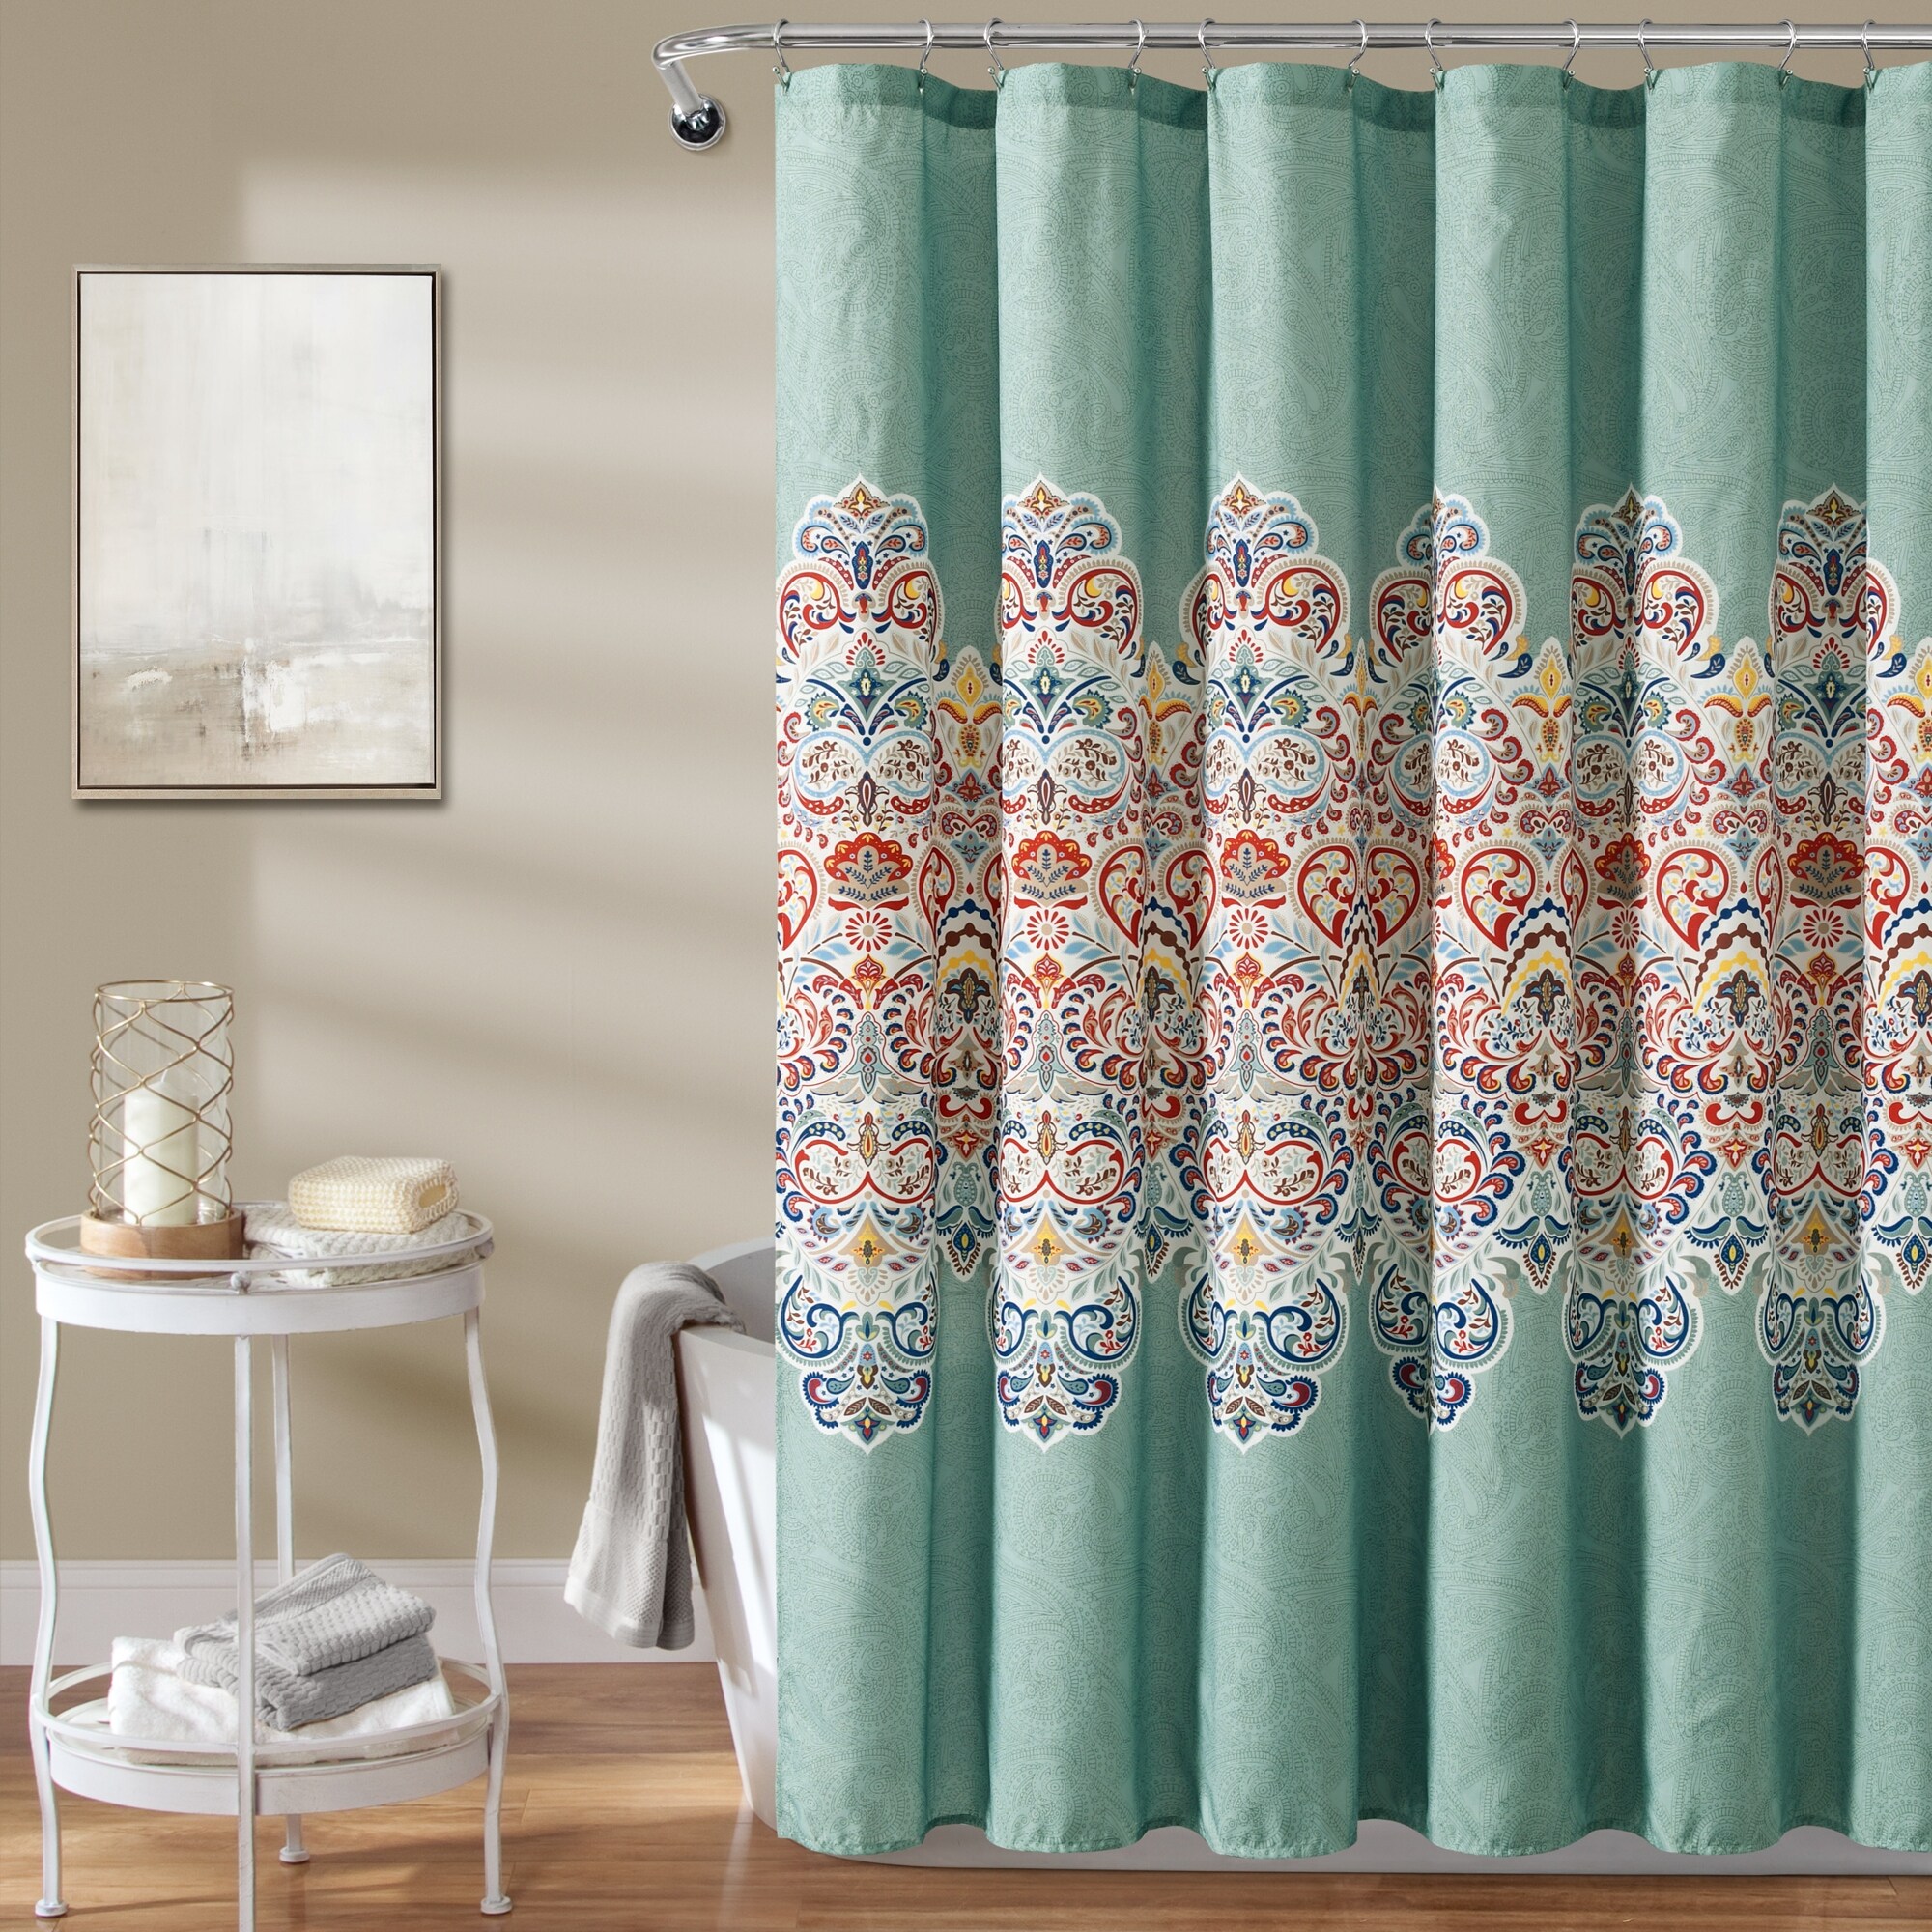 Lush Decor Boho Chic Shower Curtain with Peva Lining and Rings Set